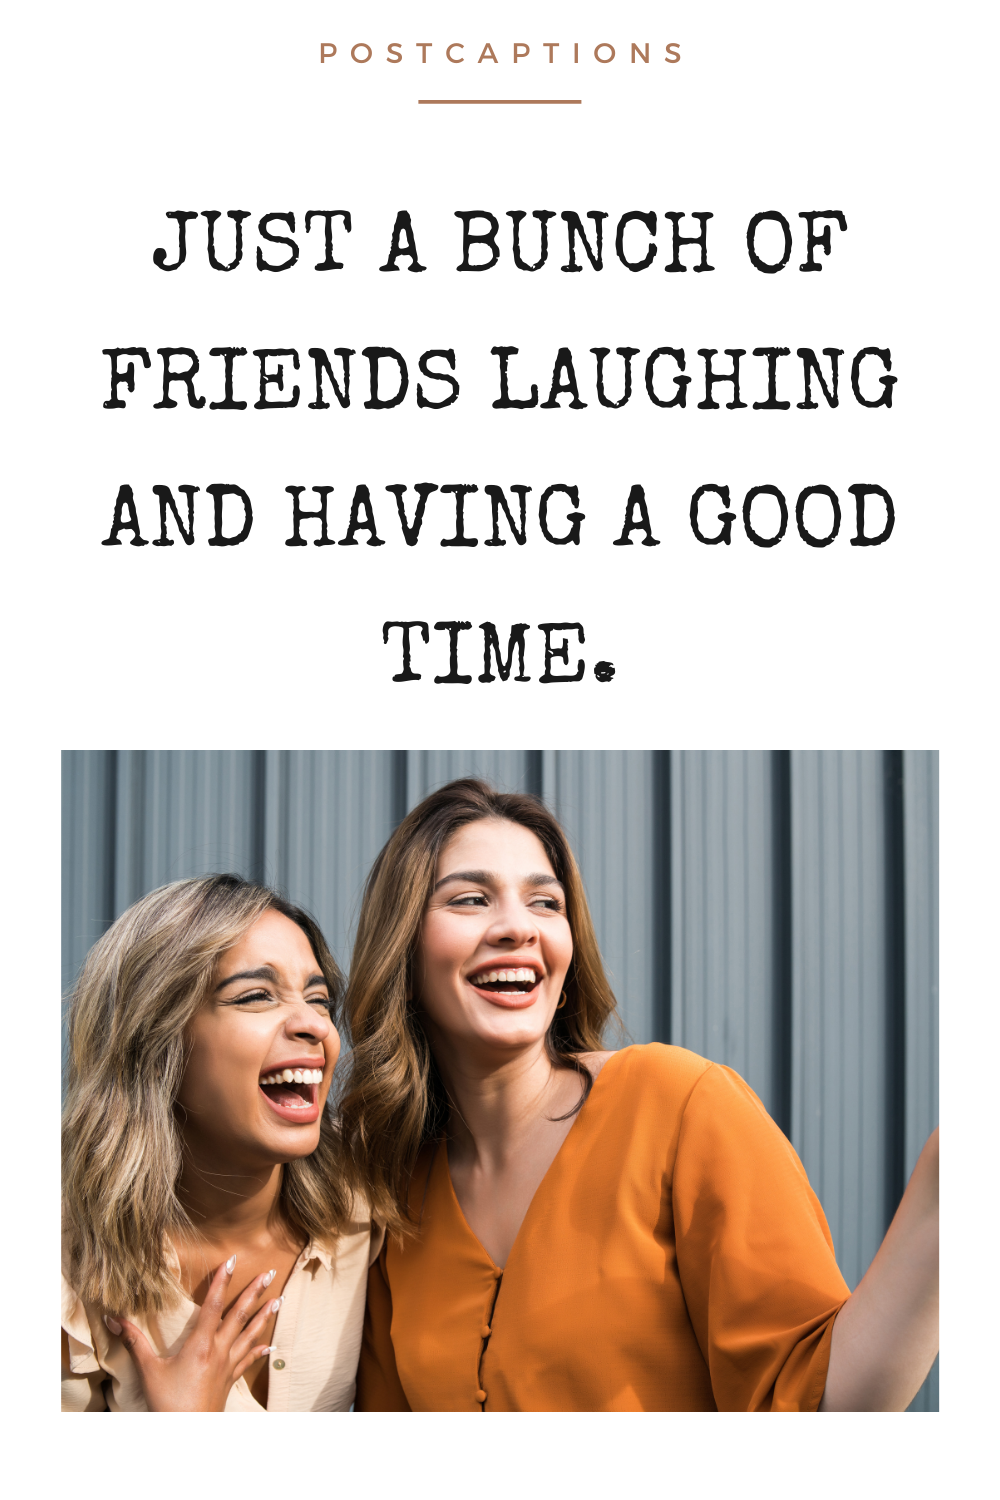 Captions about laughing